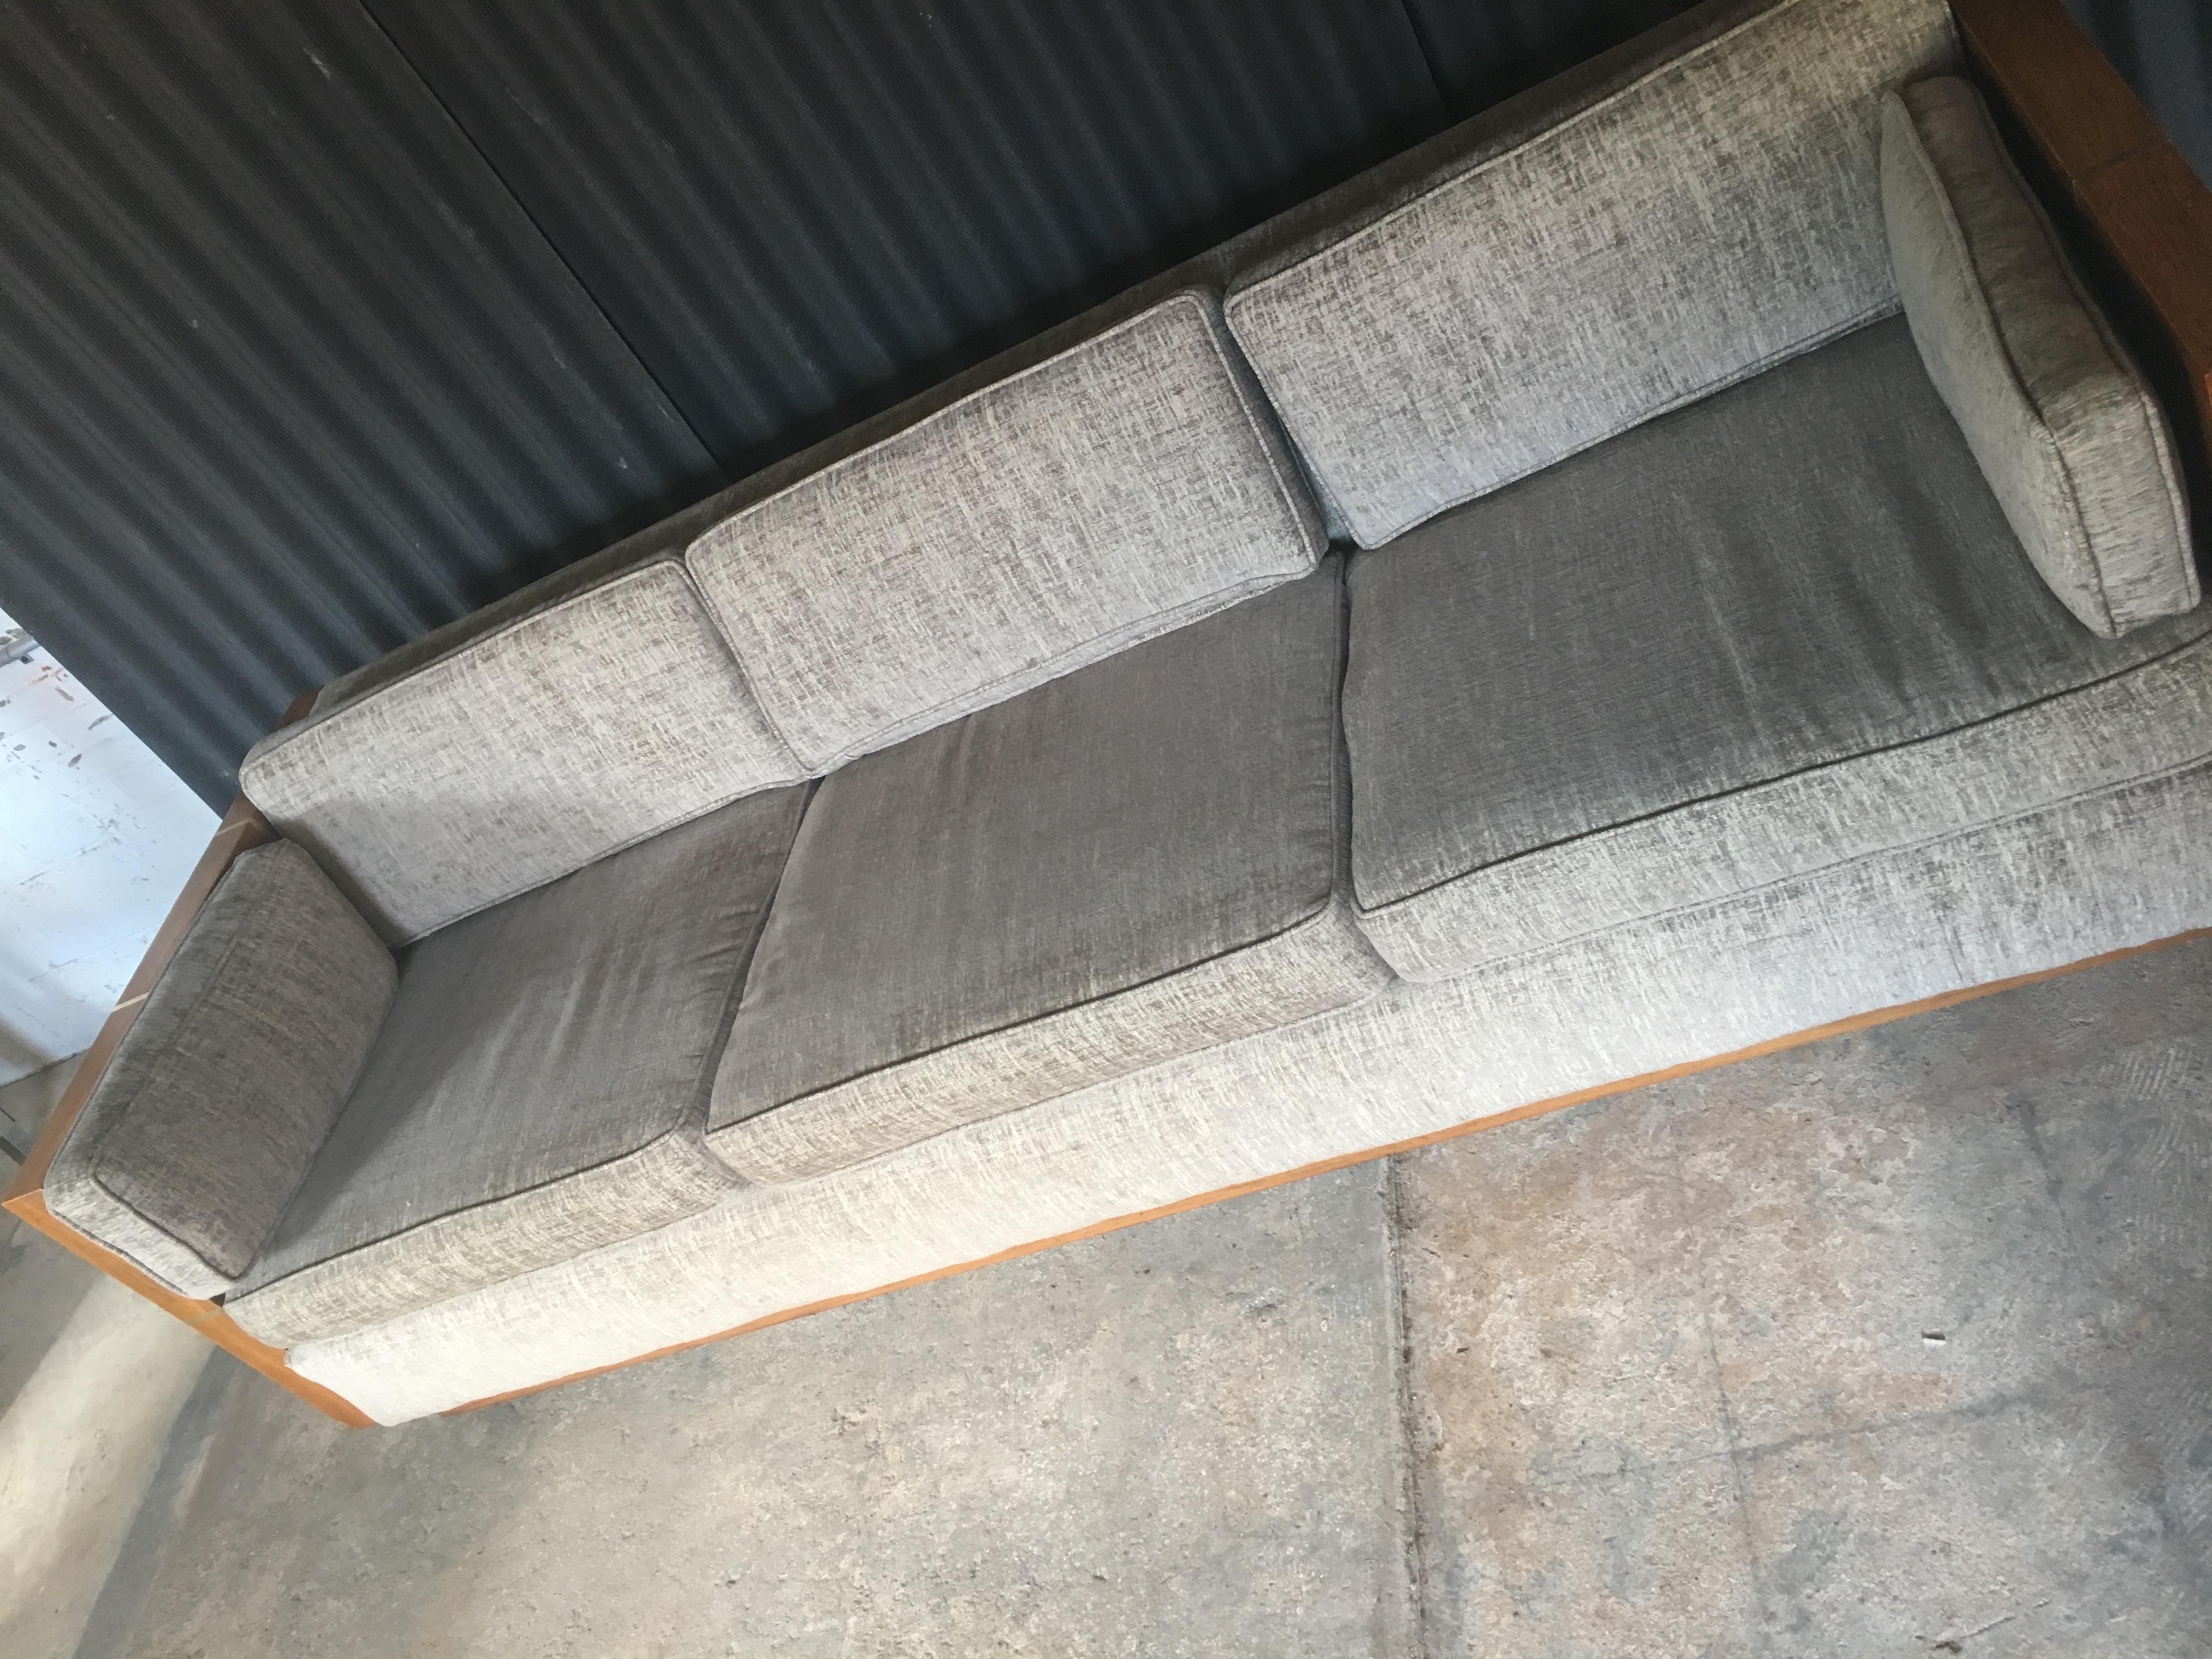 Incredible case sofa in the style of designer, Milo Baughman.
This piece came to us in simply beautiful condition and was recently reupholstered in this clean and modern fabric. Fabric is in Fantastic condition with no signs of wear at all. One up